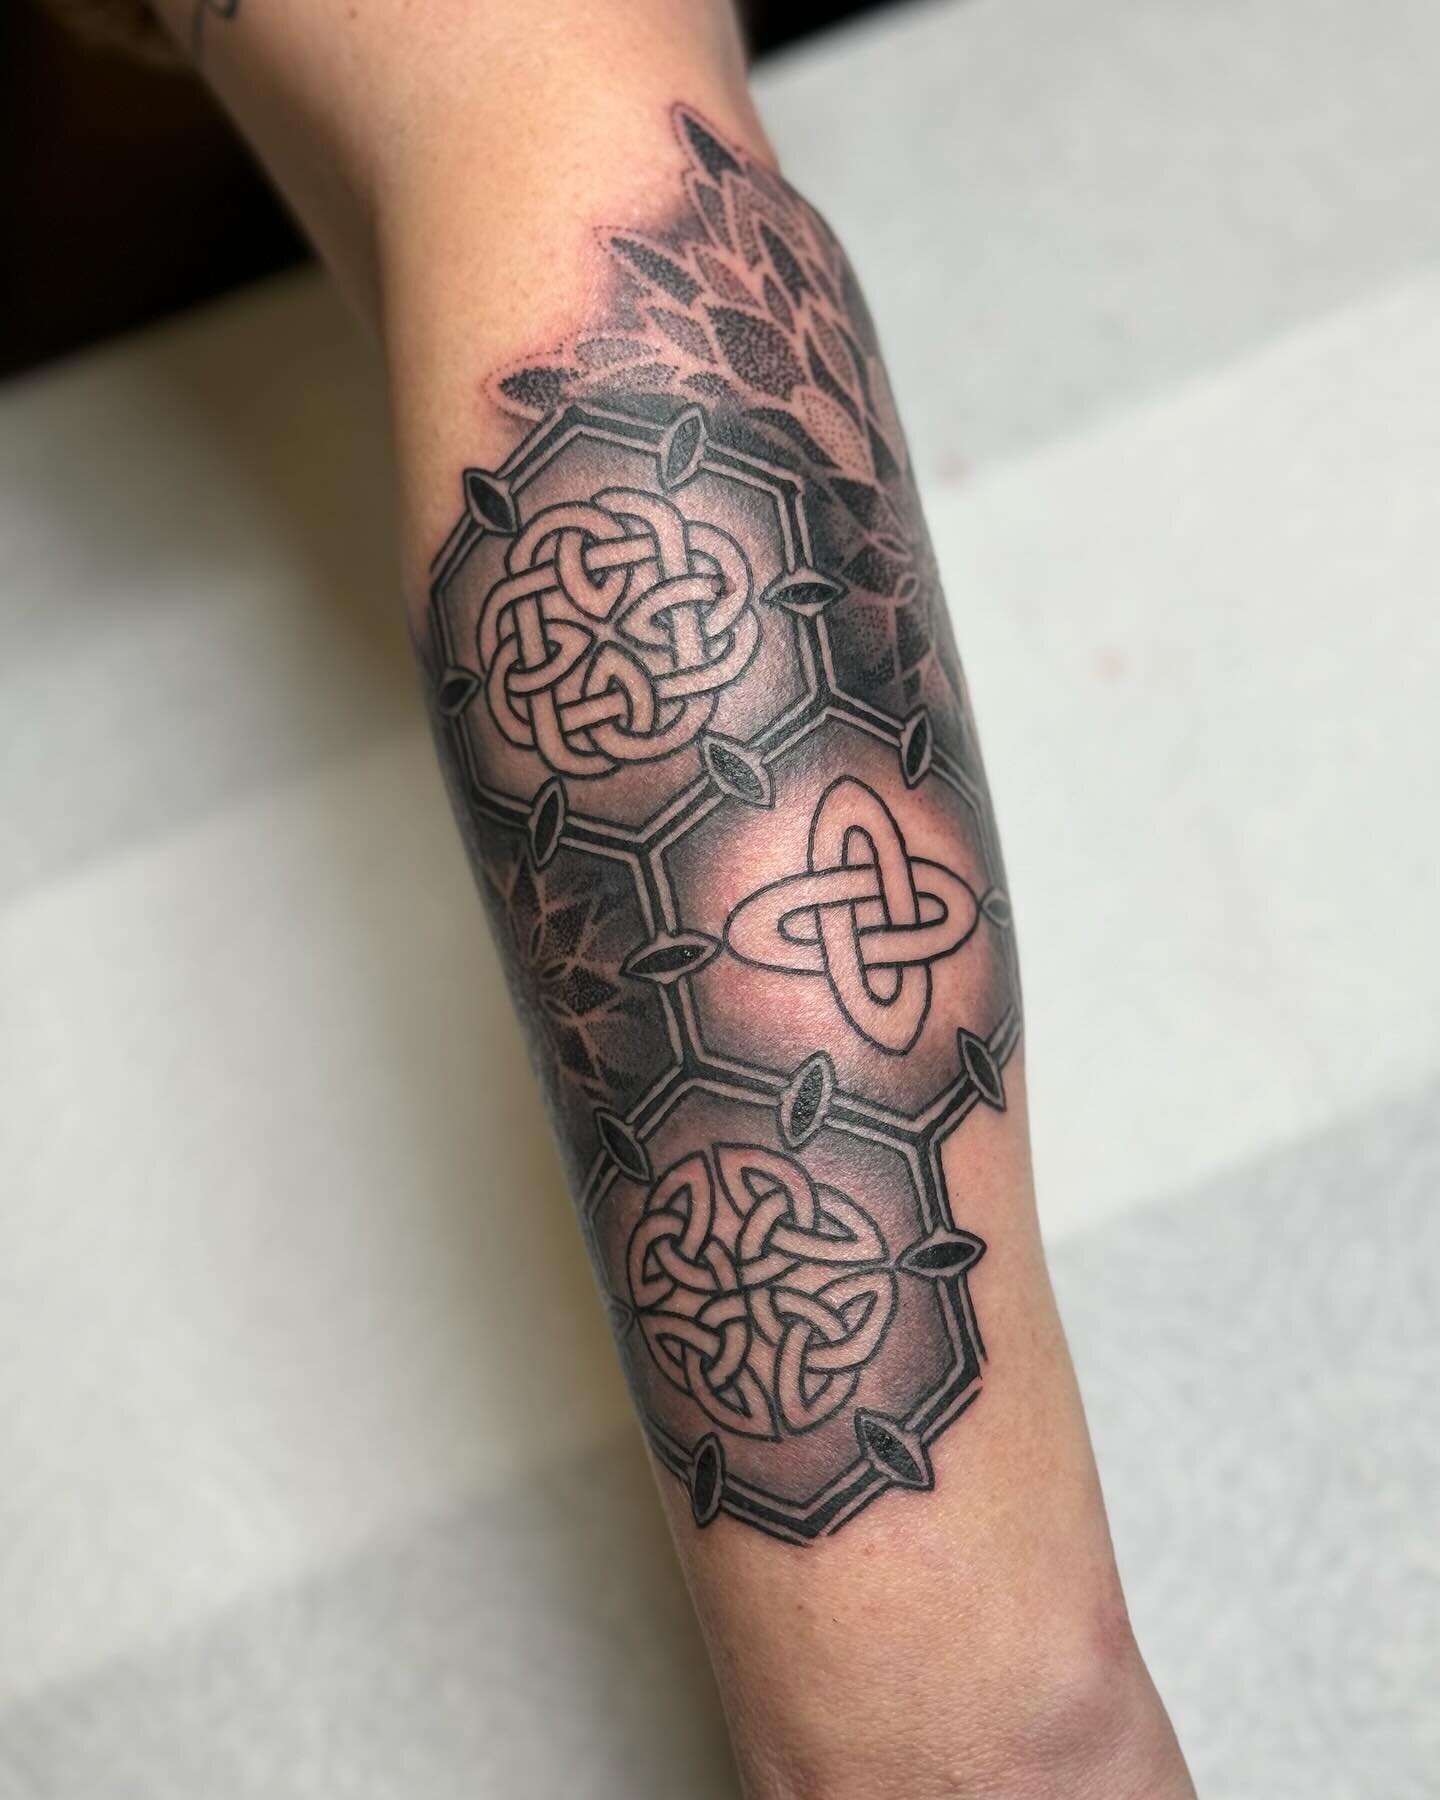 A great start to a new sleeve . Thank you for traveling from Washington and trusting me to do this project Lisa ! 

#geoemtry #celtic #geometrictattooartist #sacredgeometry #ornamental #darkornaments #keishanicoletattoo #keishanicolenouveau #mandala 